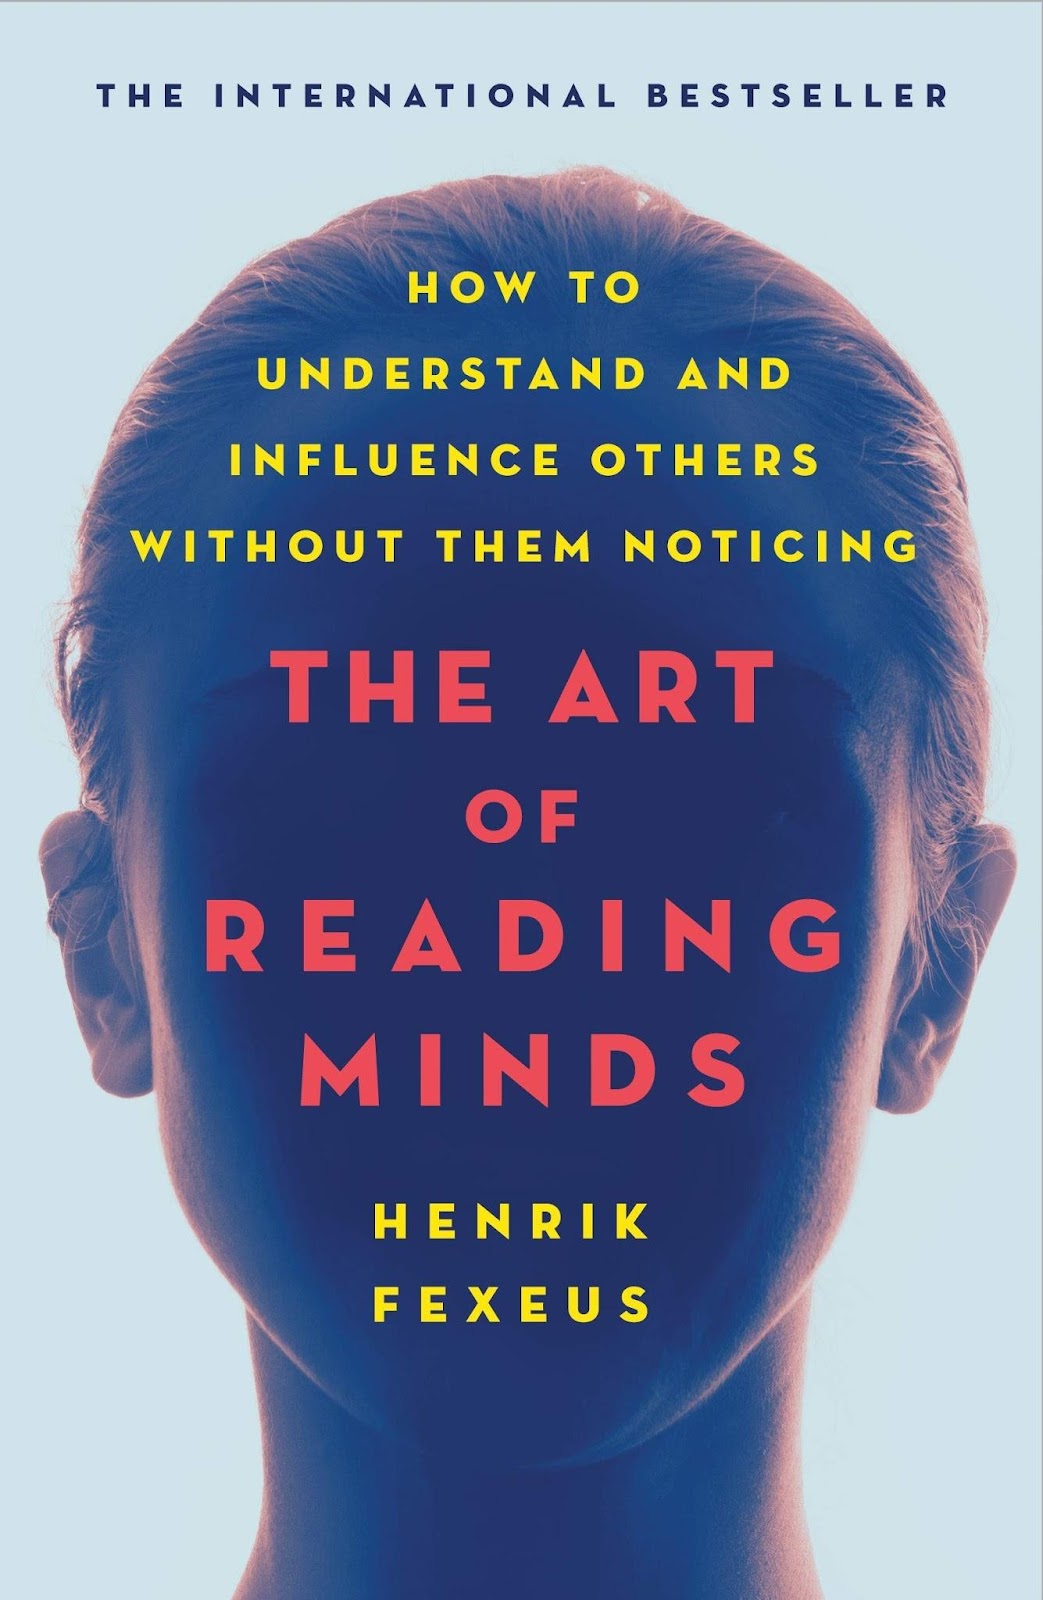 Book “The Art of Reading Minds”